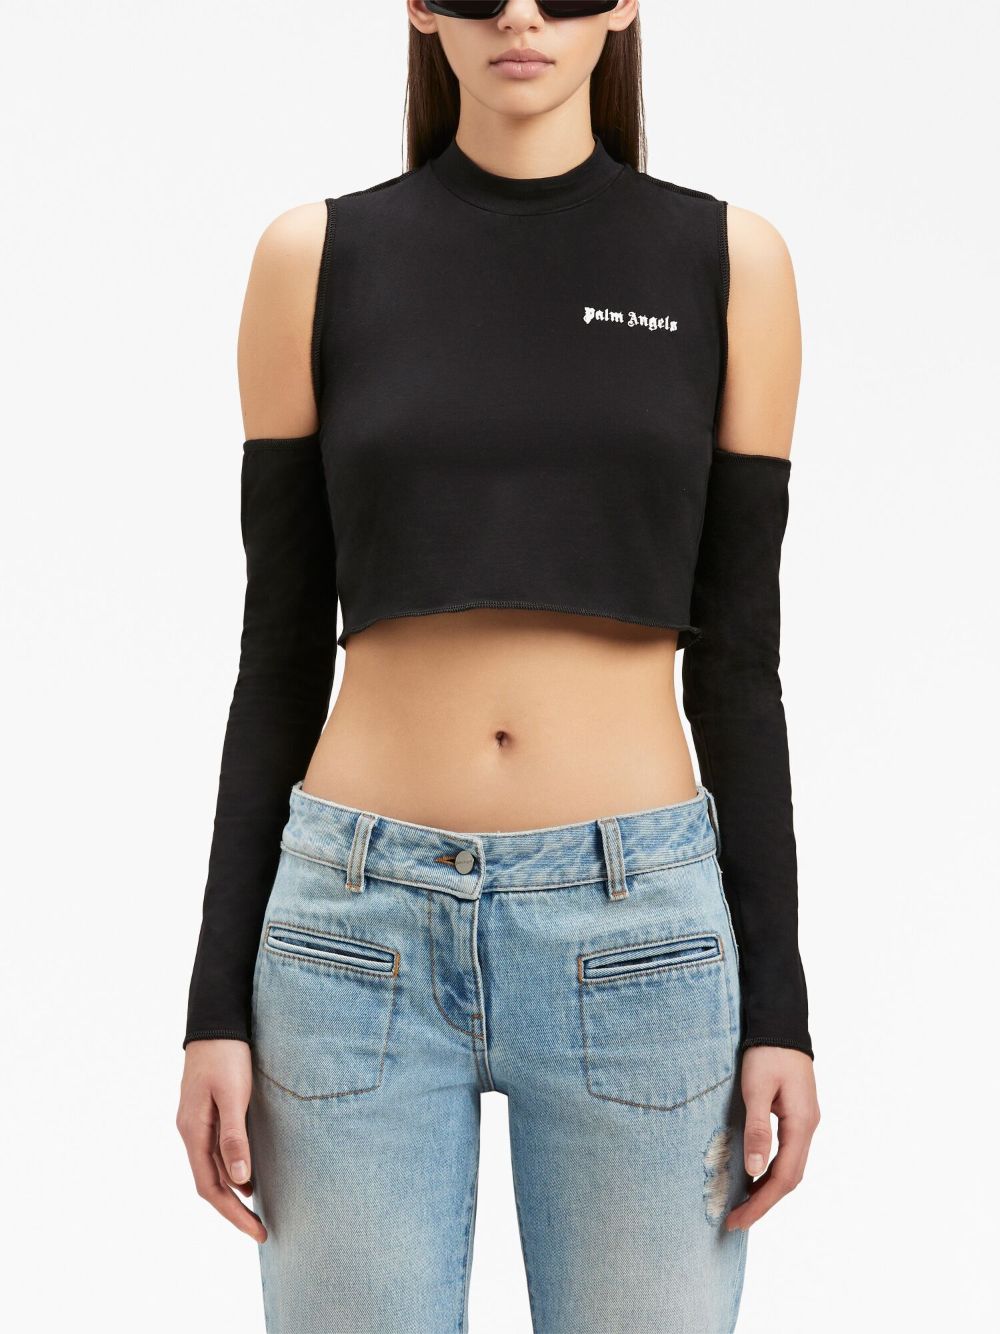 PALM ANGELS Top For Woman